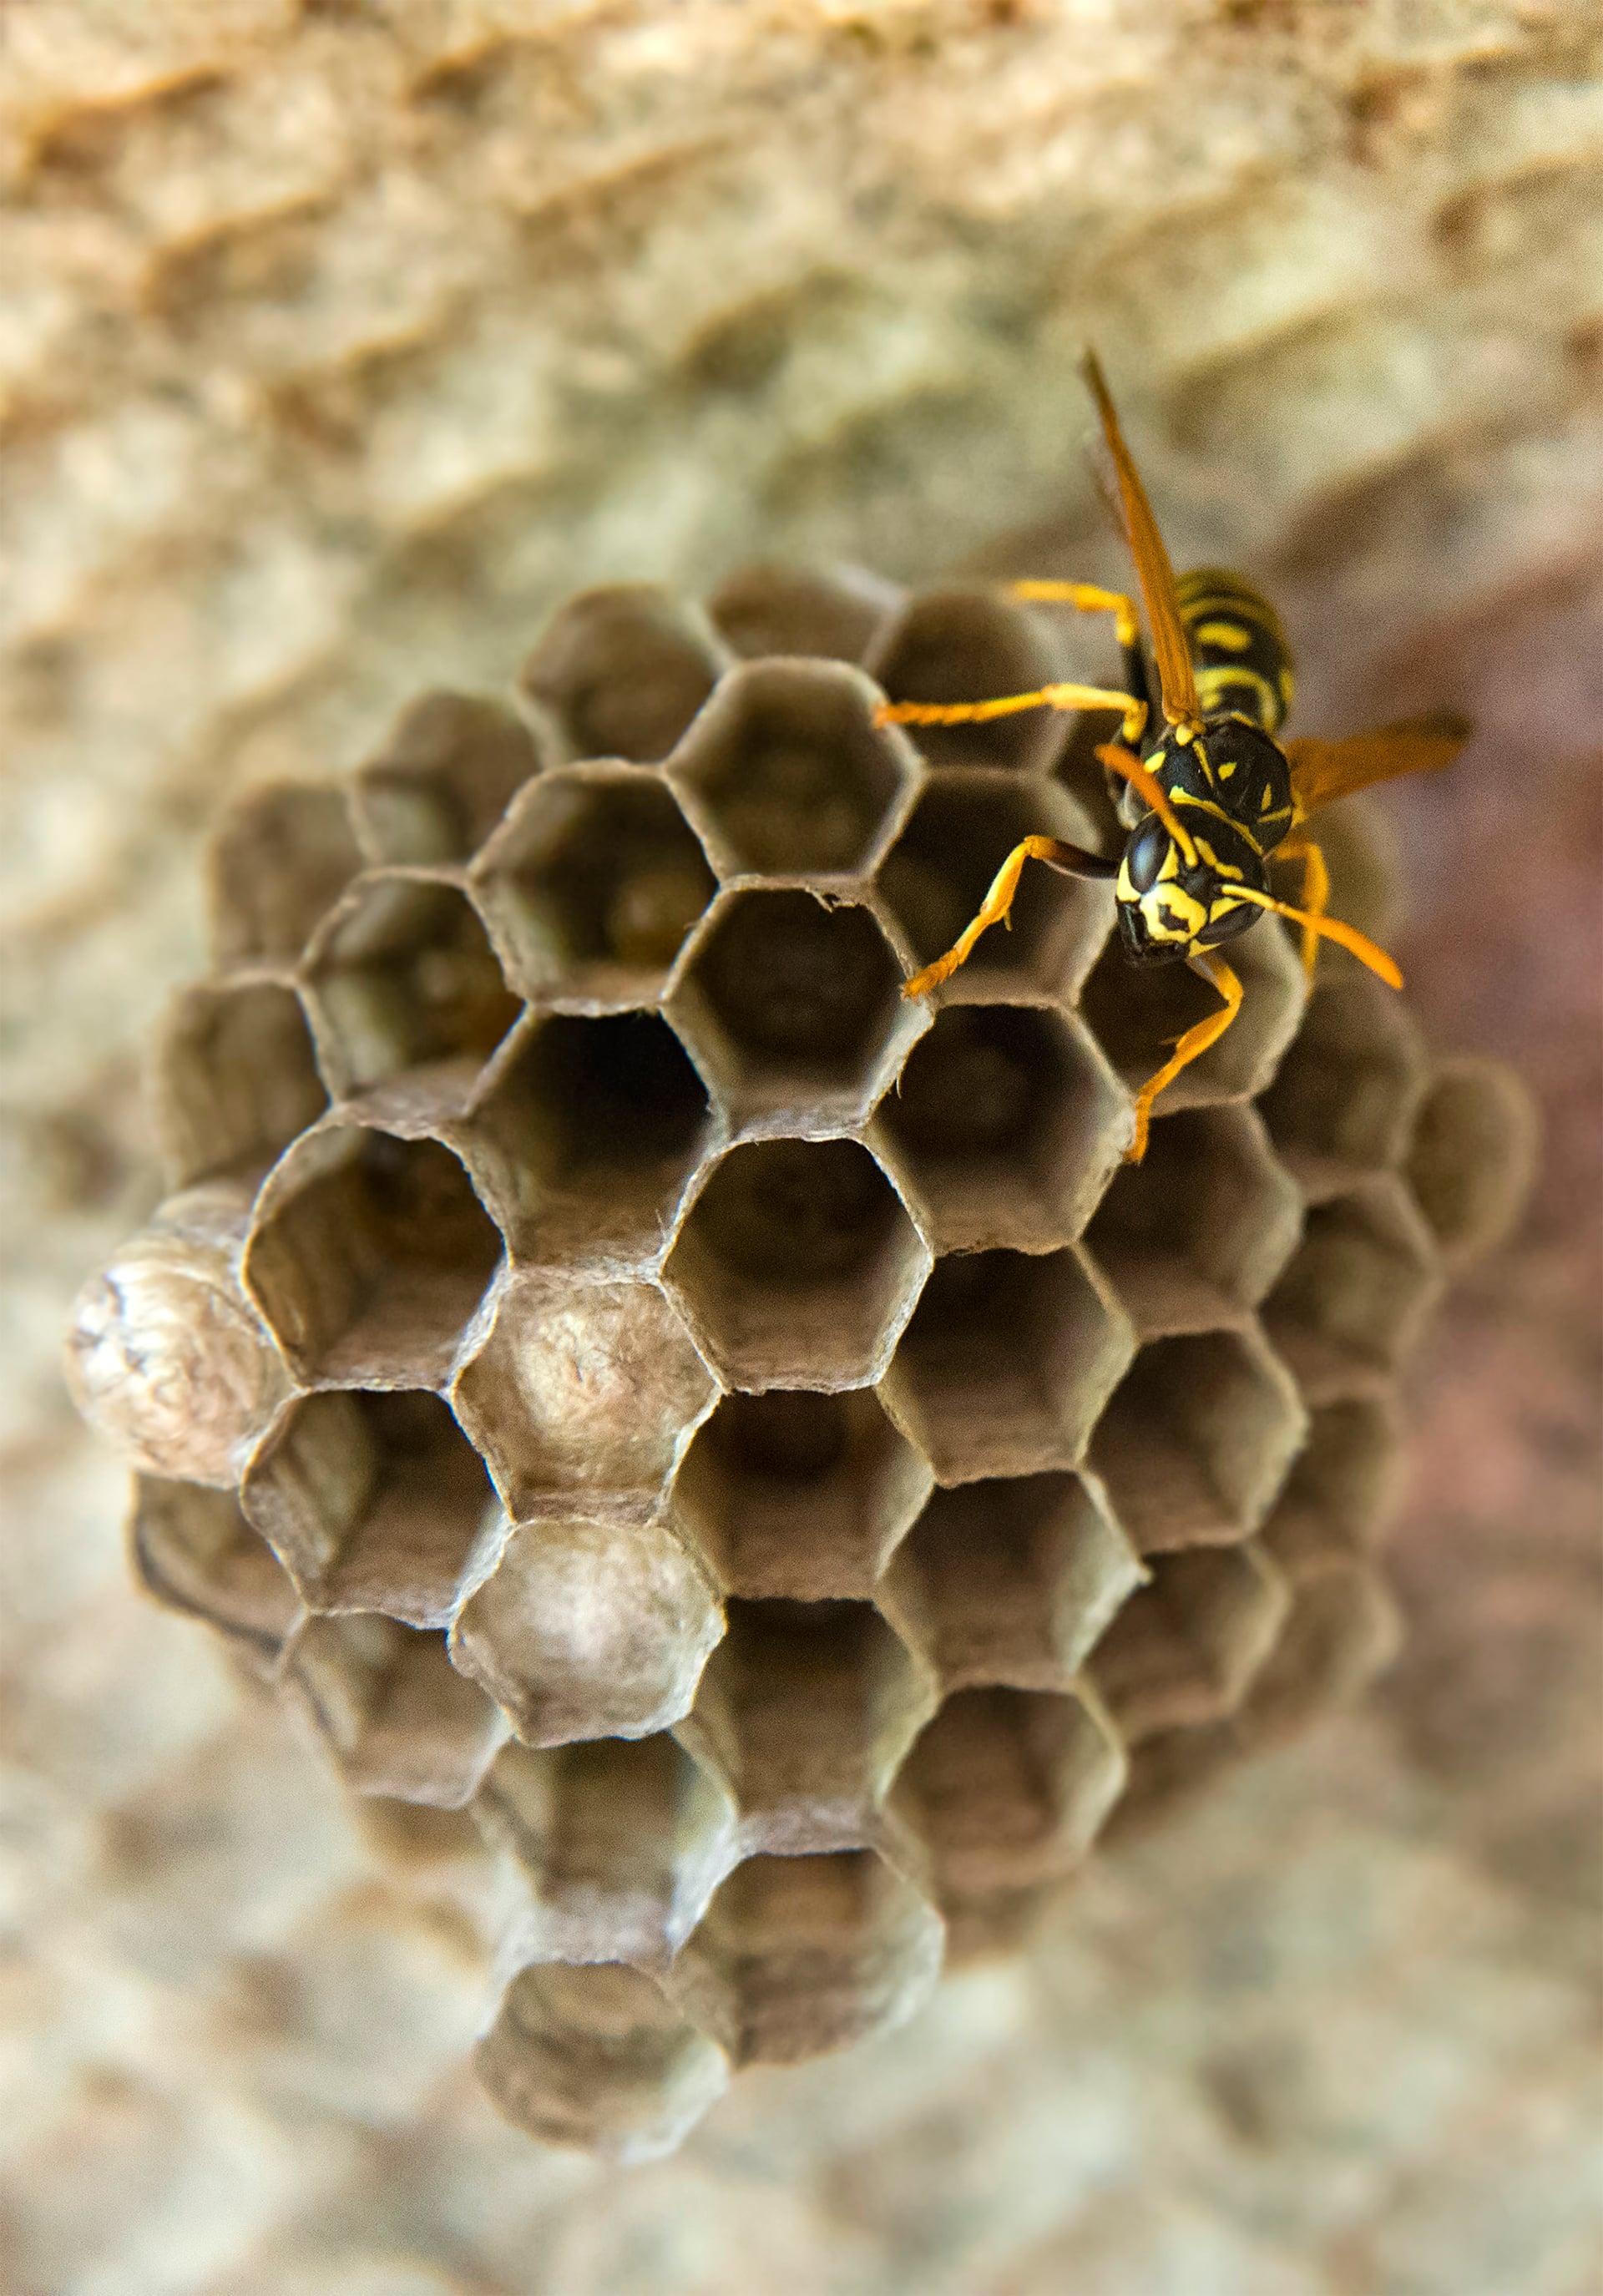 Wasp in a wasps nest with honey combs.